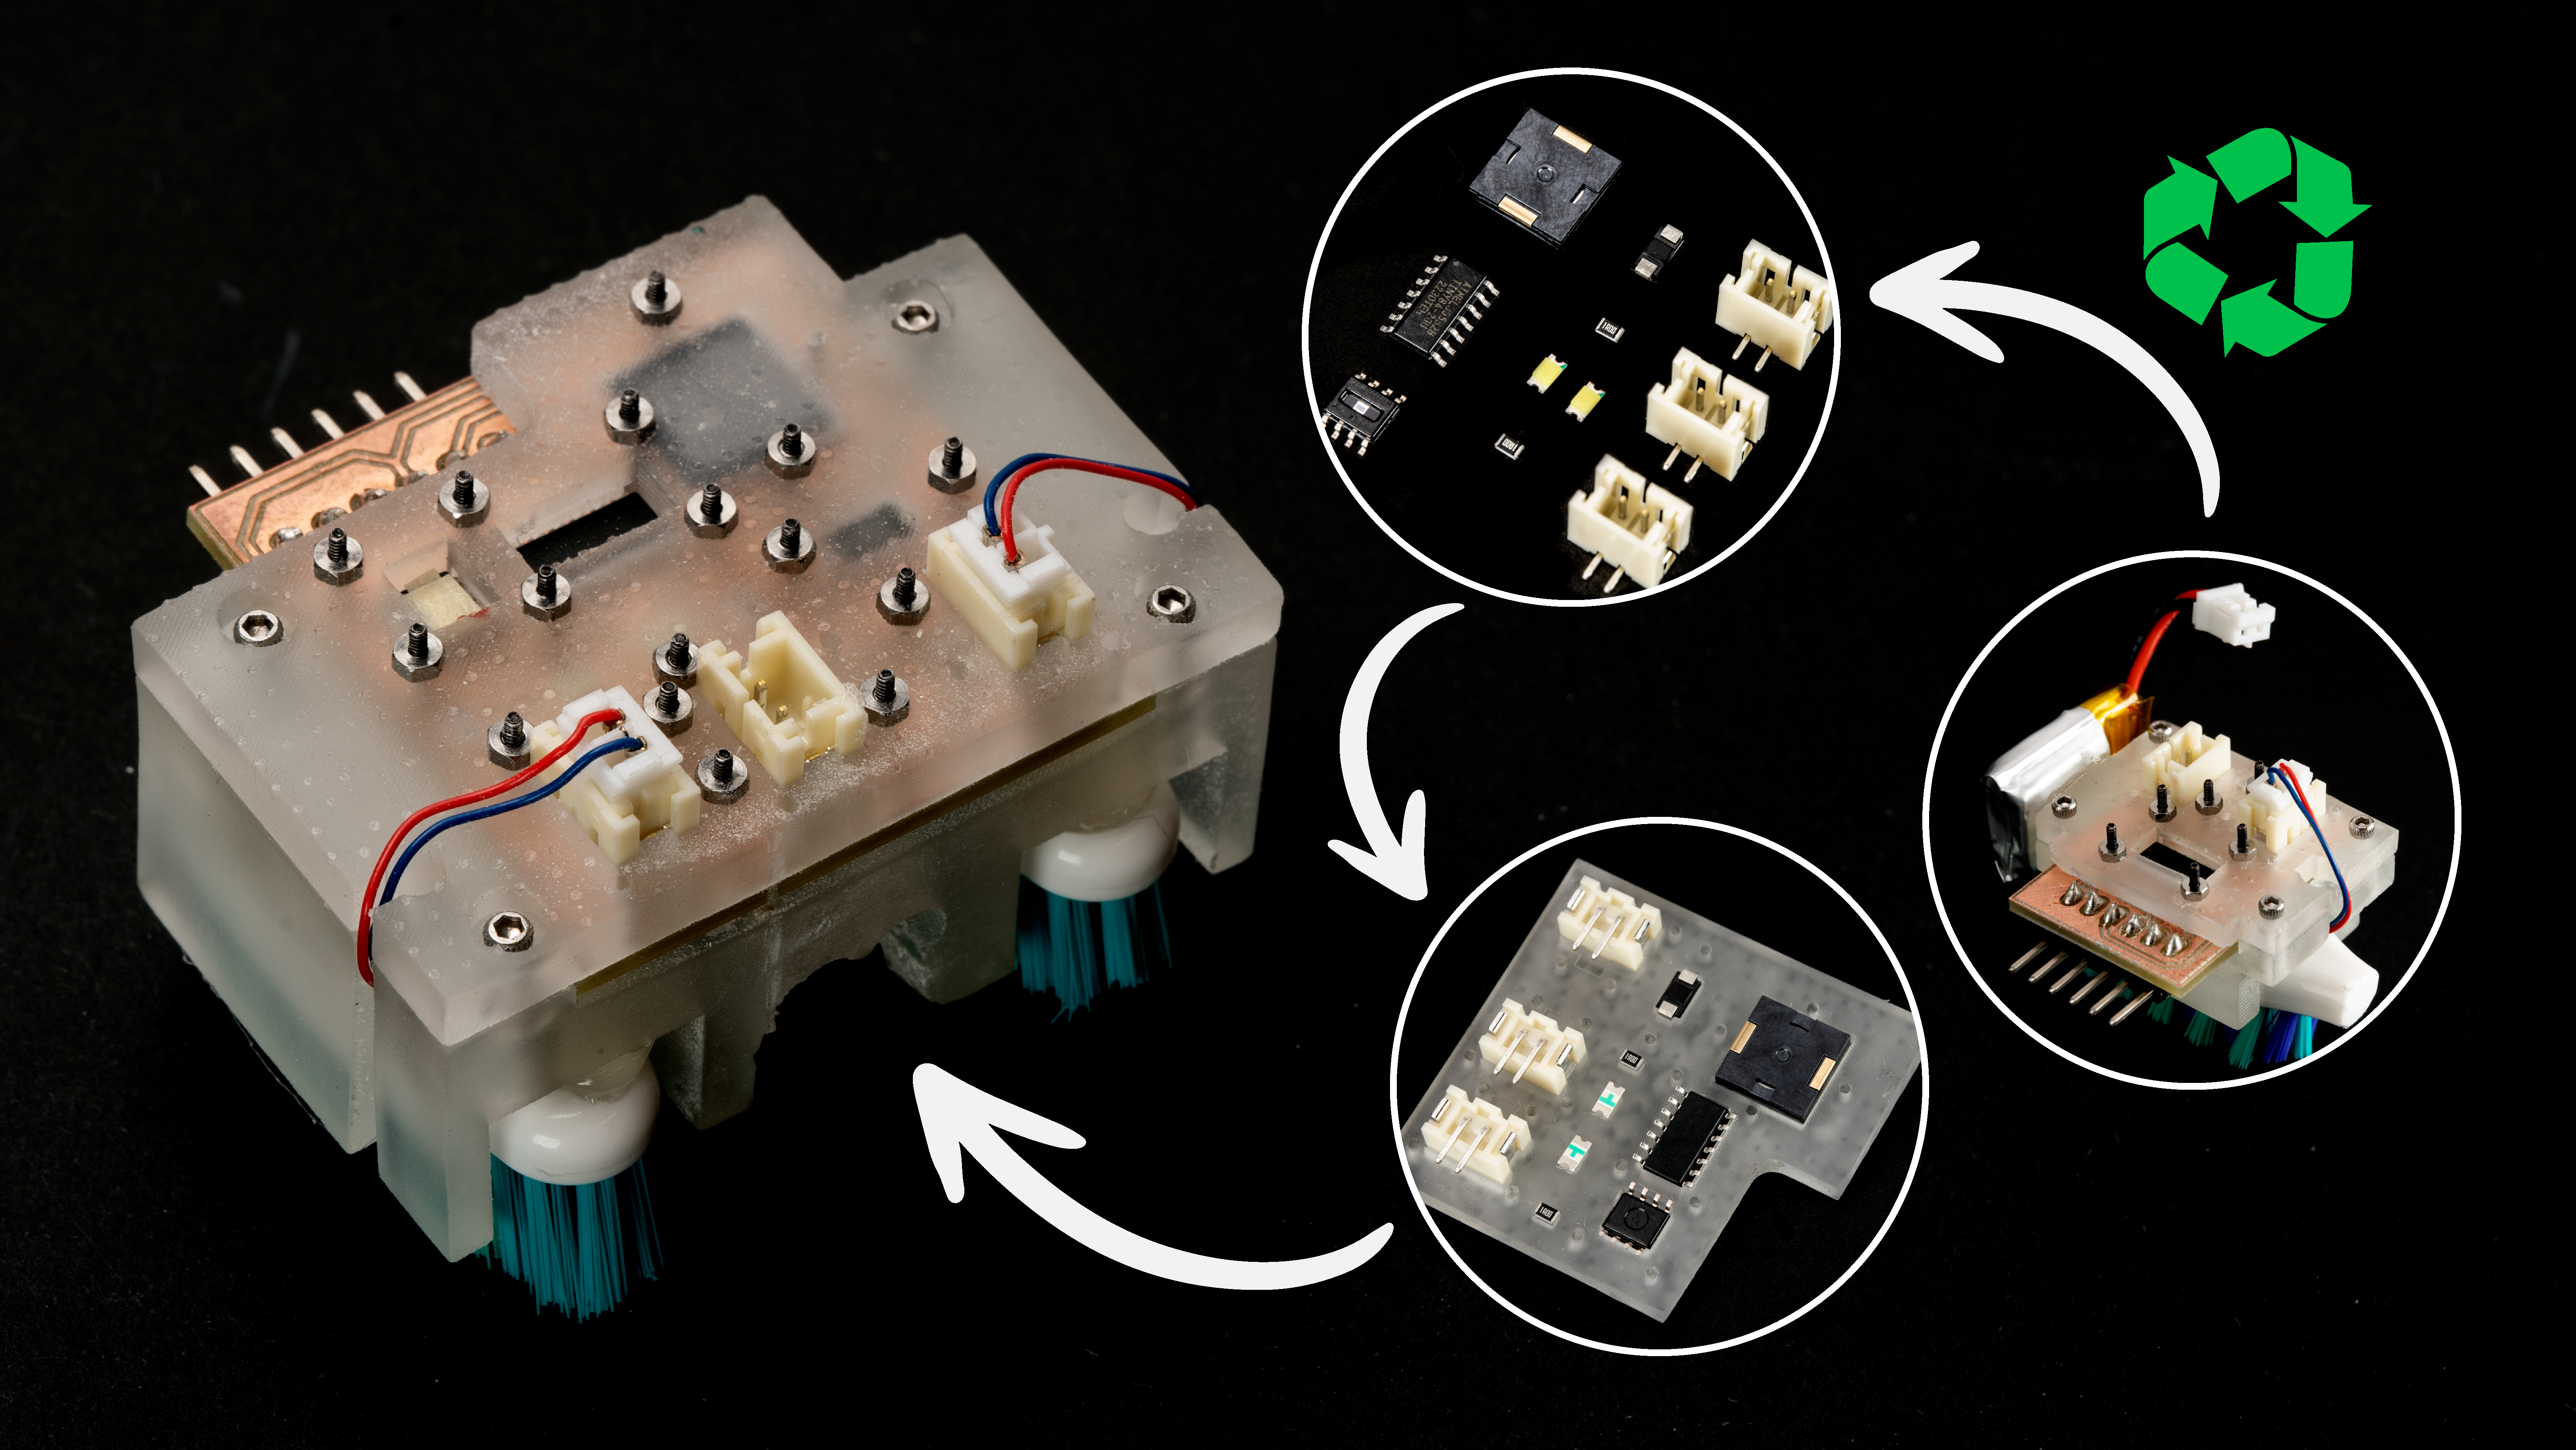 SolderlessPCB: Reusing Electronic Components in PCB Prototyping through Detachable 3D Printed Housings